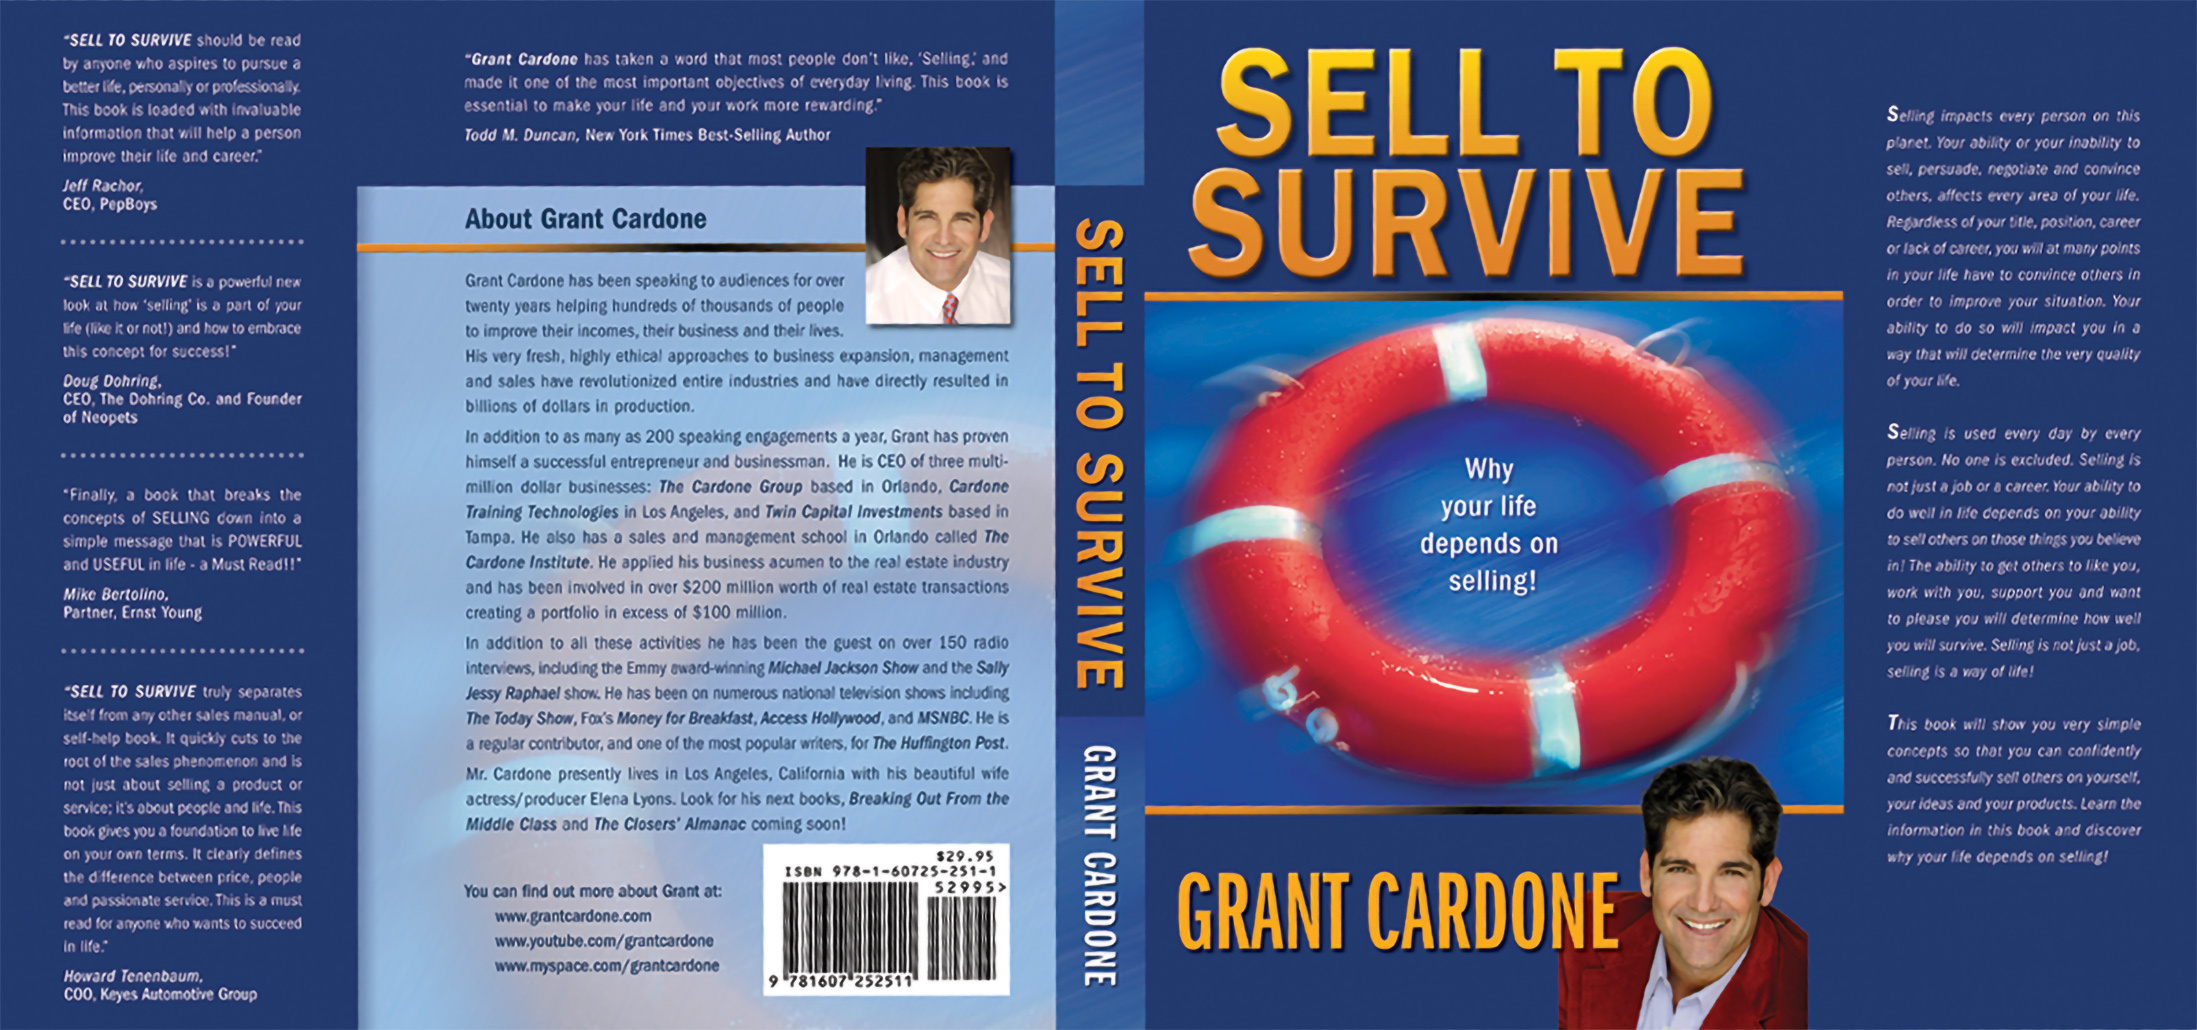 Sell To Survive | Grant Cardone Dust Jacket